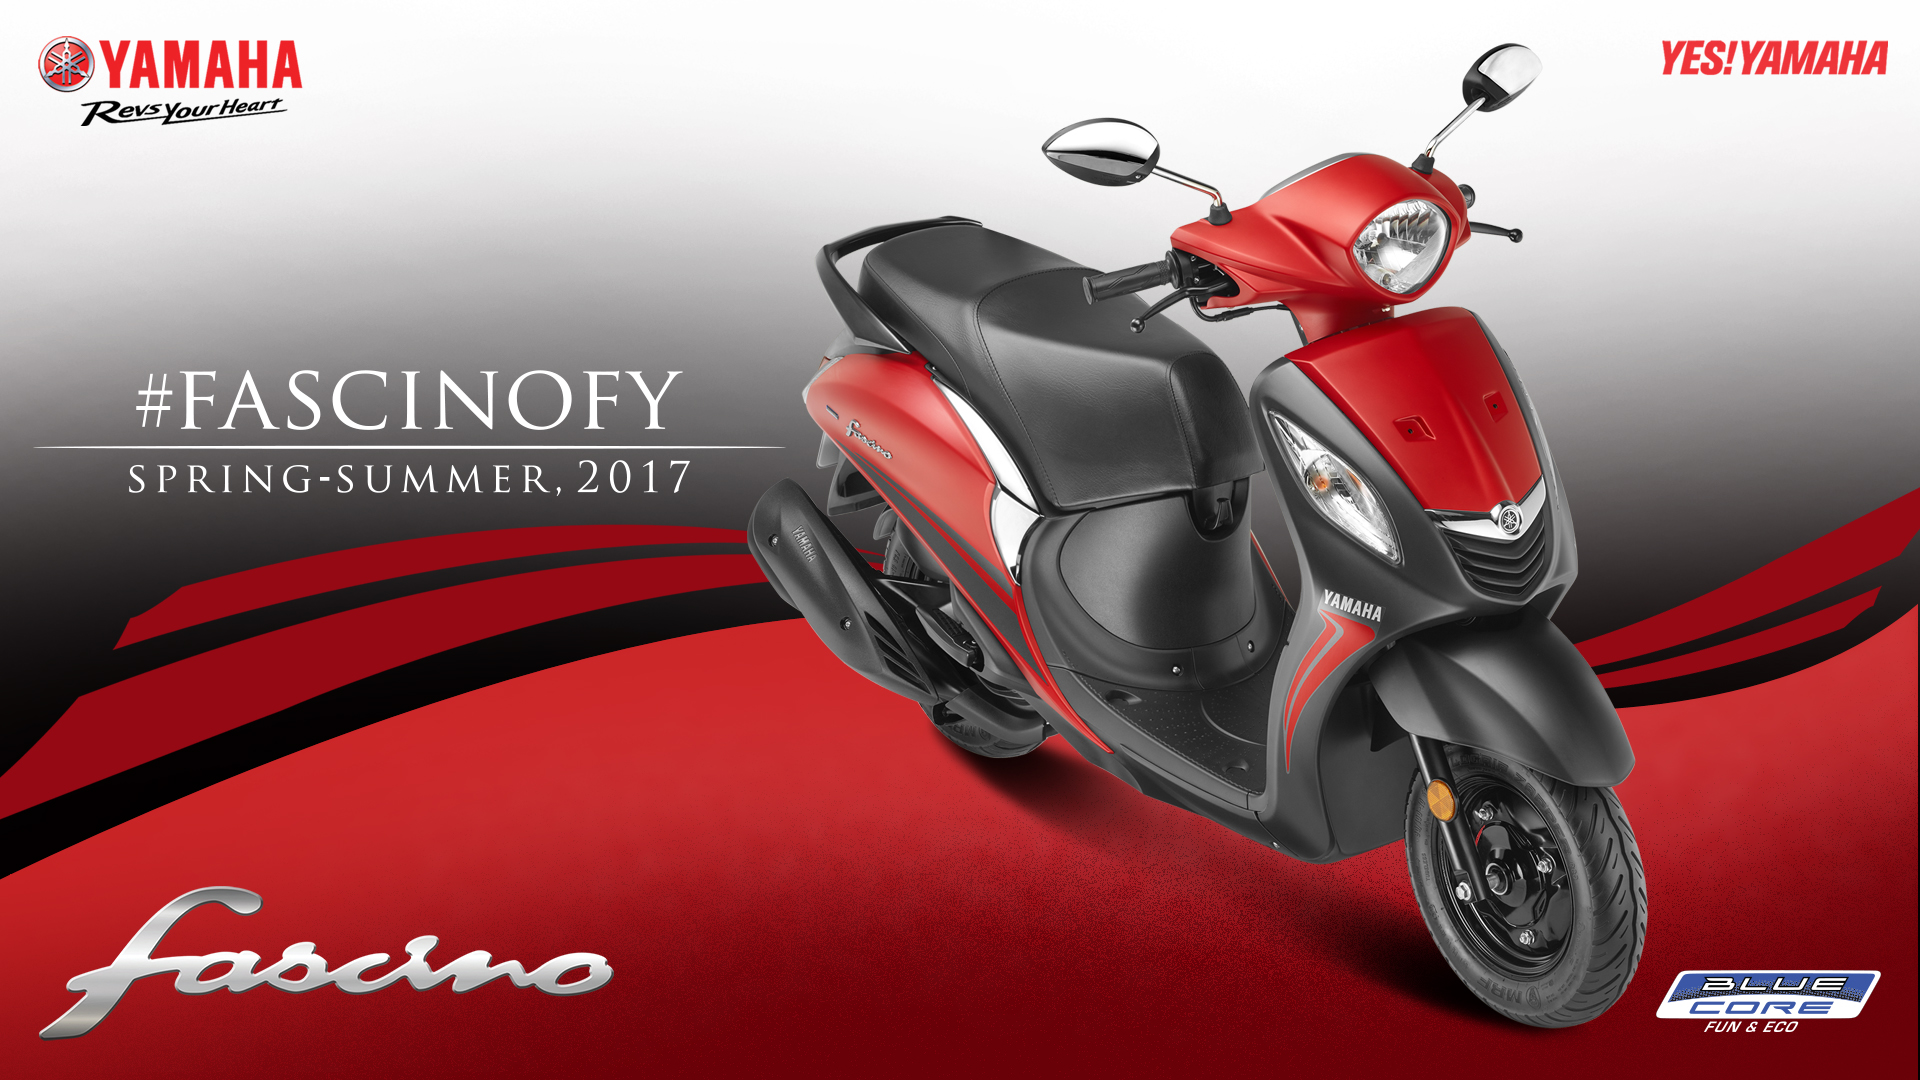 New 2017 Yamaha Fascino BS-IV Red Colour Shade